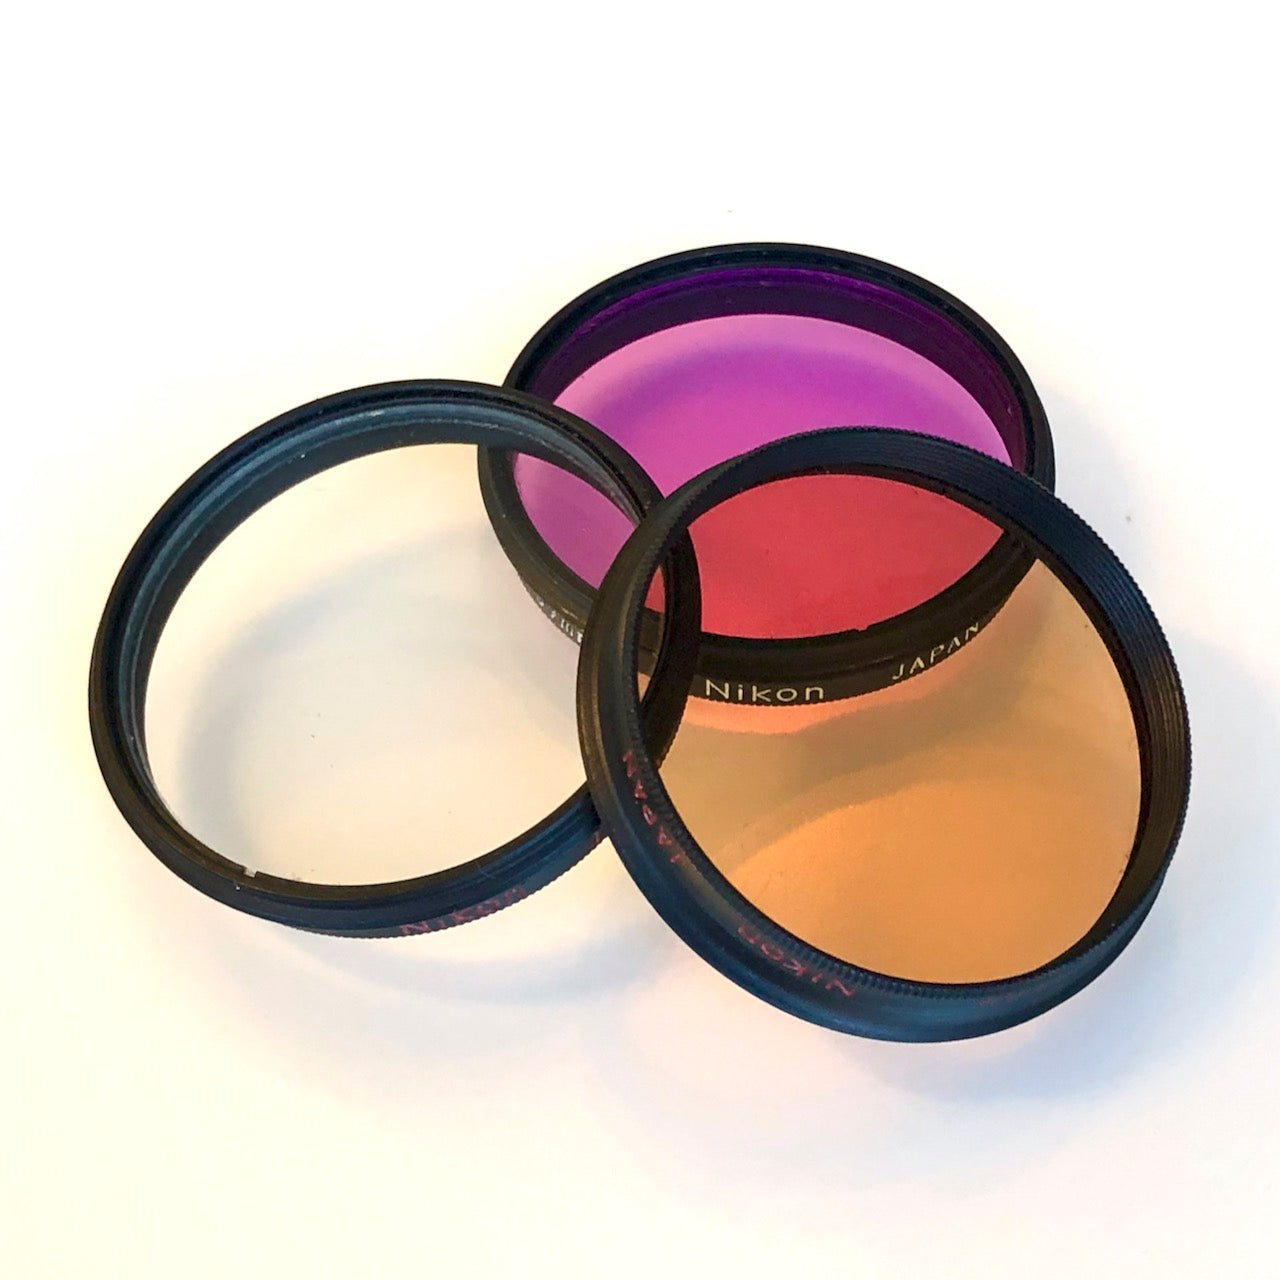 Nikon 39mm filters for drop-in holders